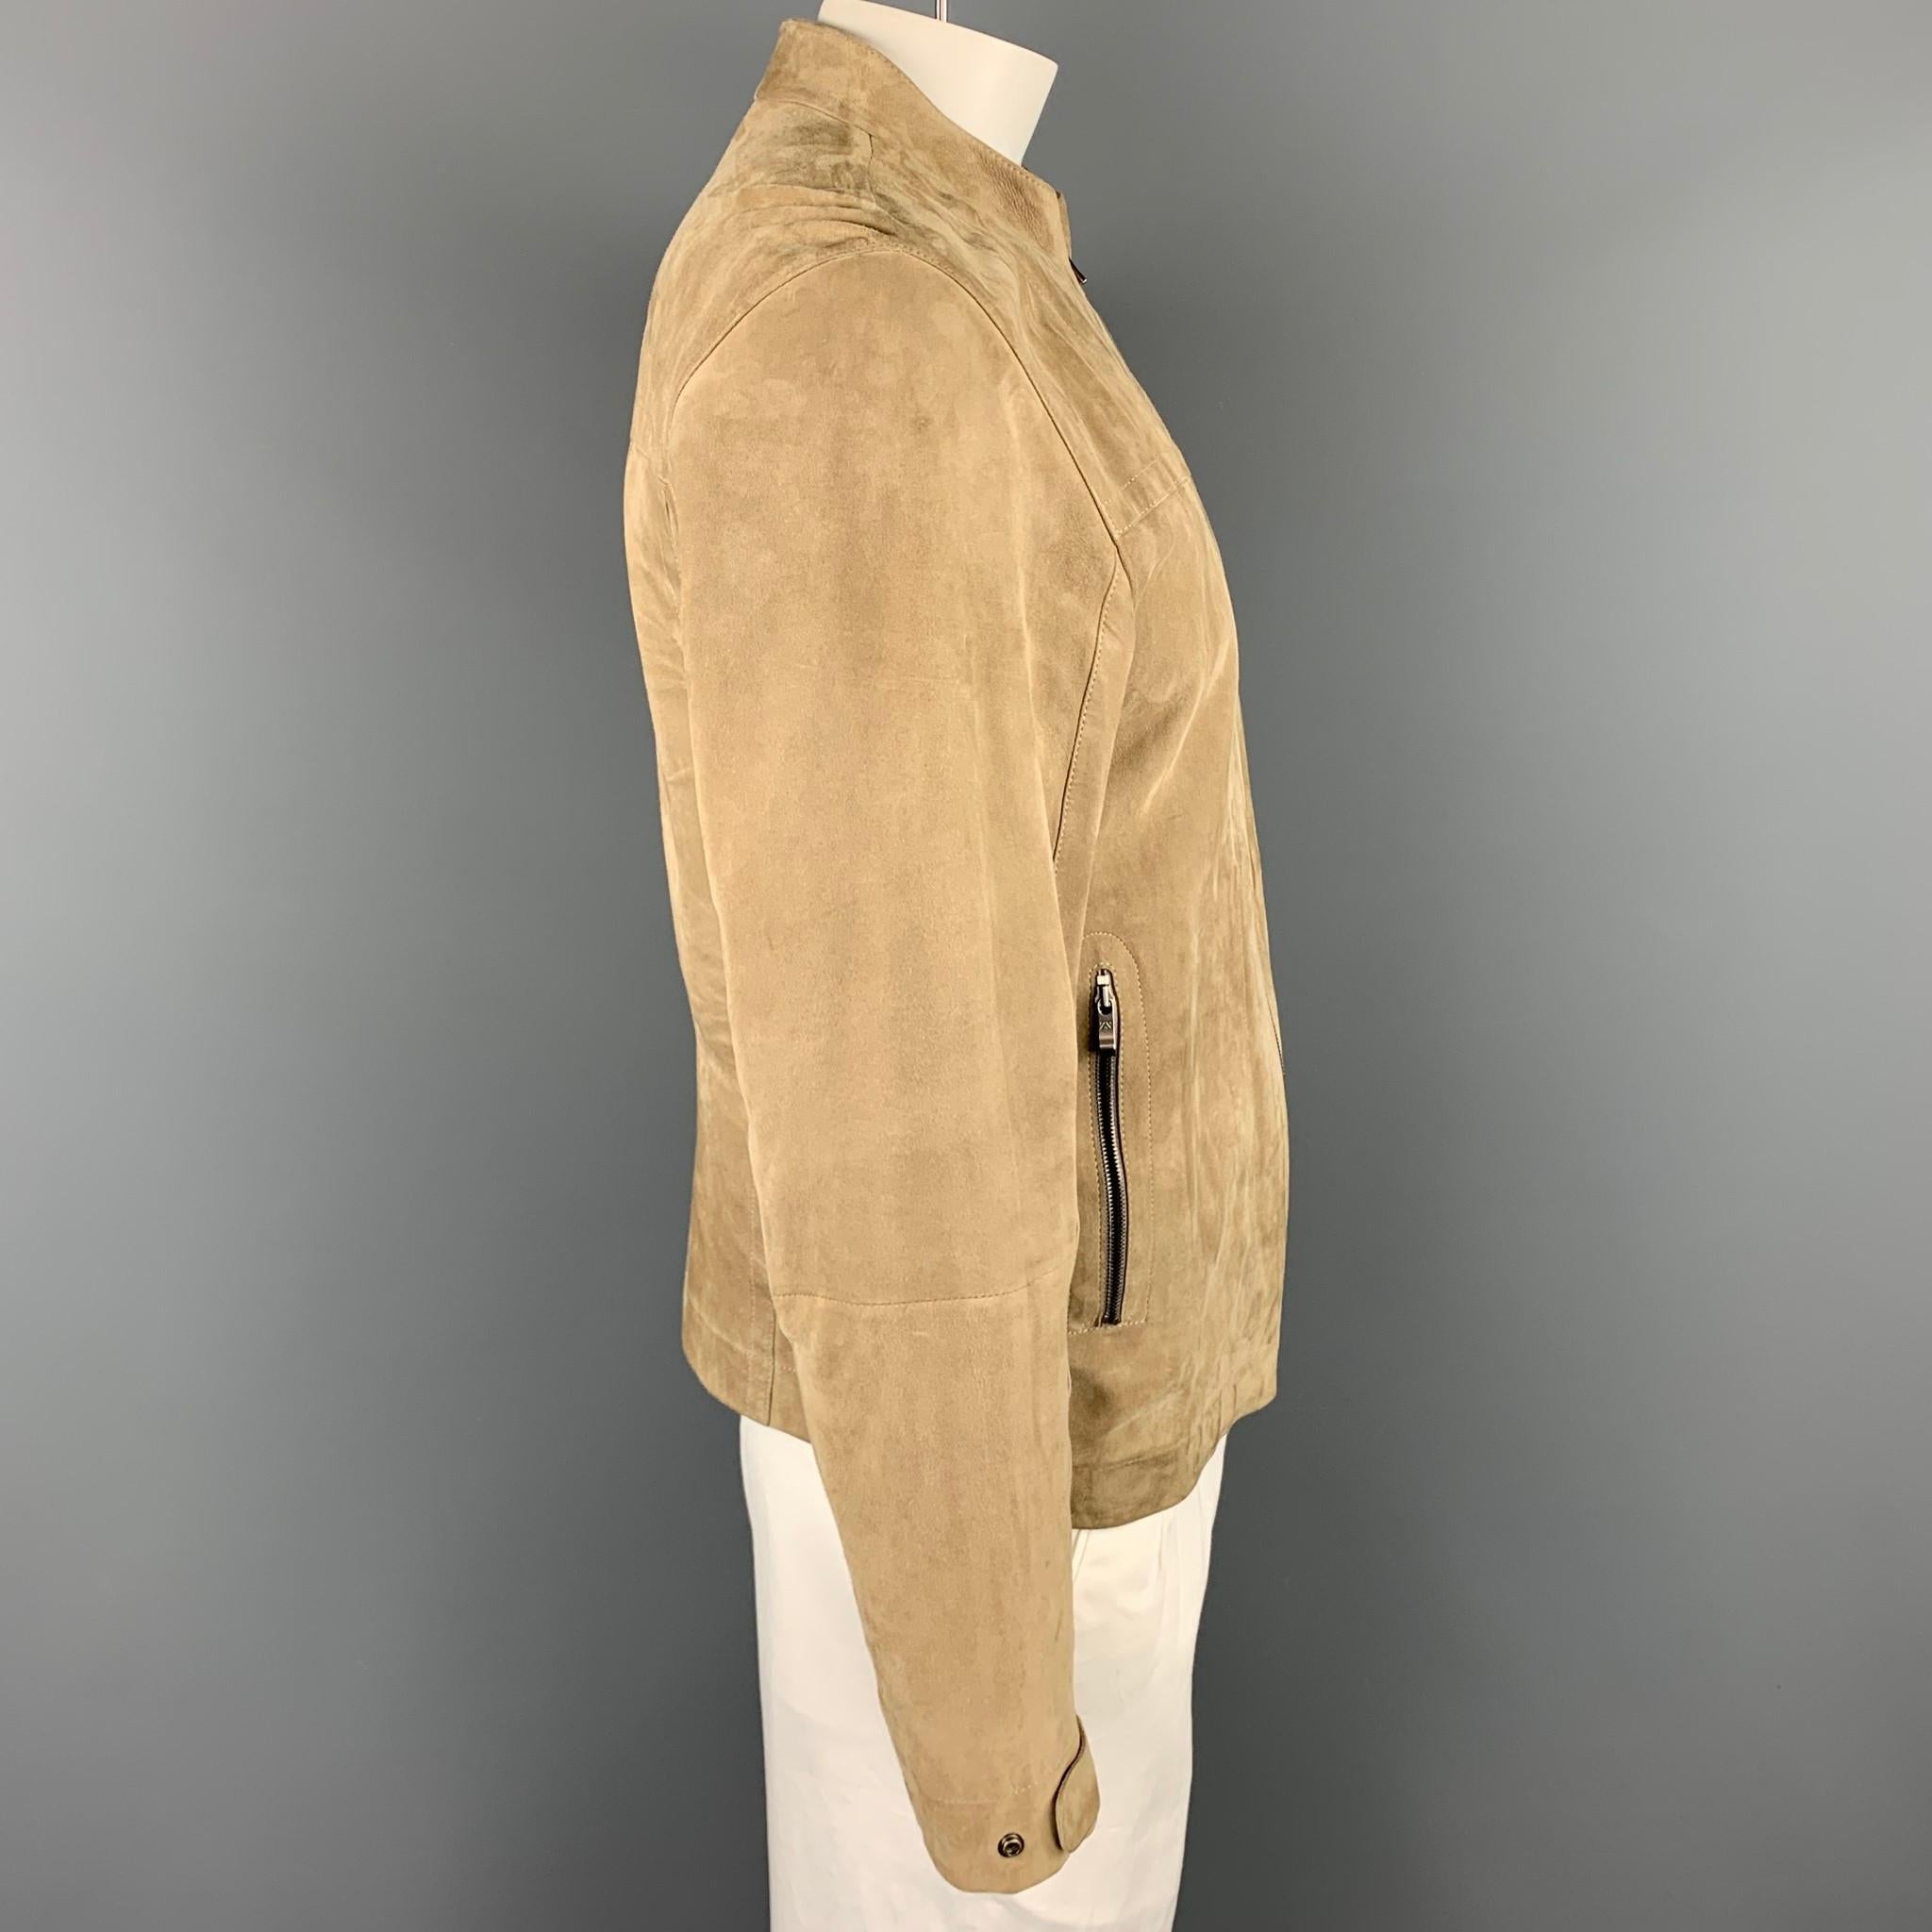 ZEGNA SPORT jacket coms in a khaki suede featuring a nehru collar, top stitching, and a zip up closure. Moderate wear.

Good Pre-Owned Condition.
Marked: L

Measurements:

Shoulder: 19 in.
Chest: 41 in.
Sleeve: 26 in.
Length: 24.5 in. 